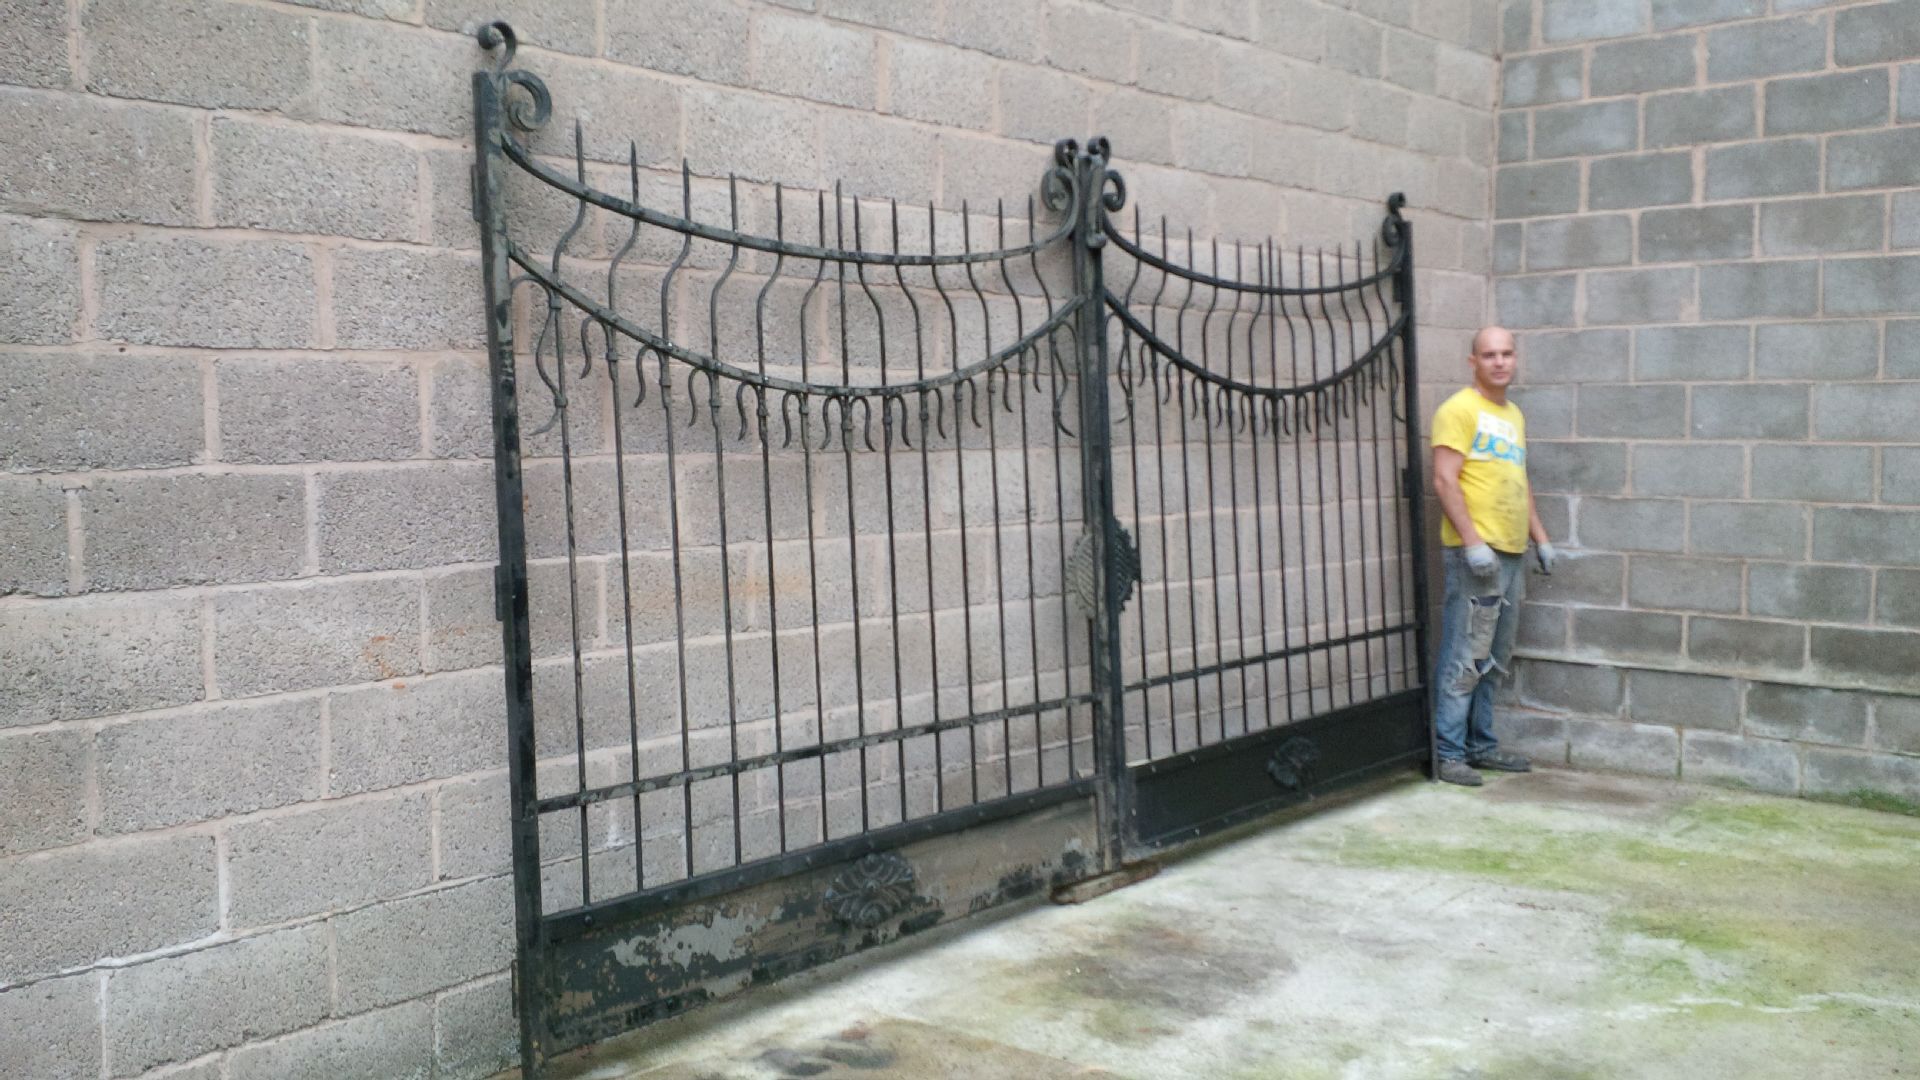 LARGE PAIR HEAVY SOLID IRON GATES 2.4M HIGH X 2.1M WIDE